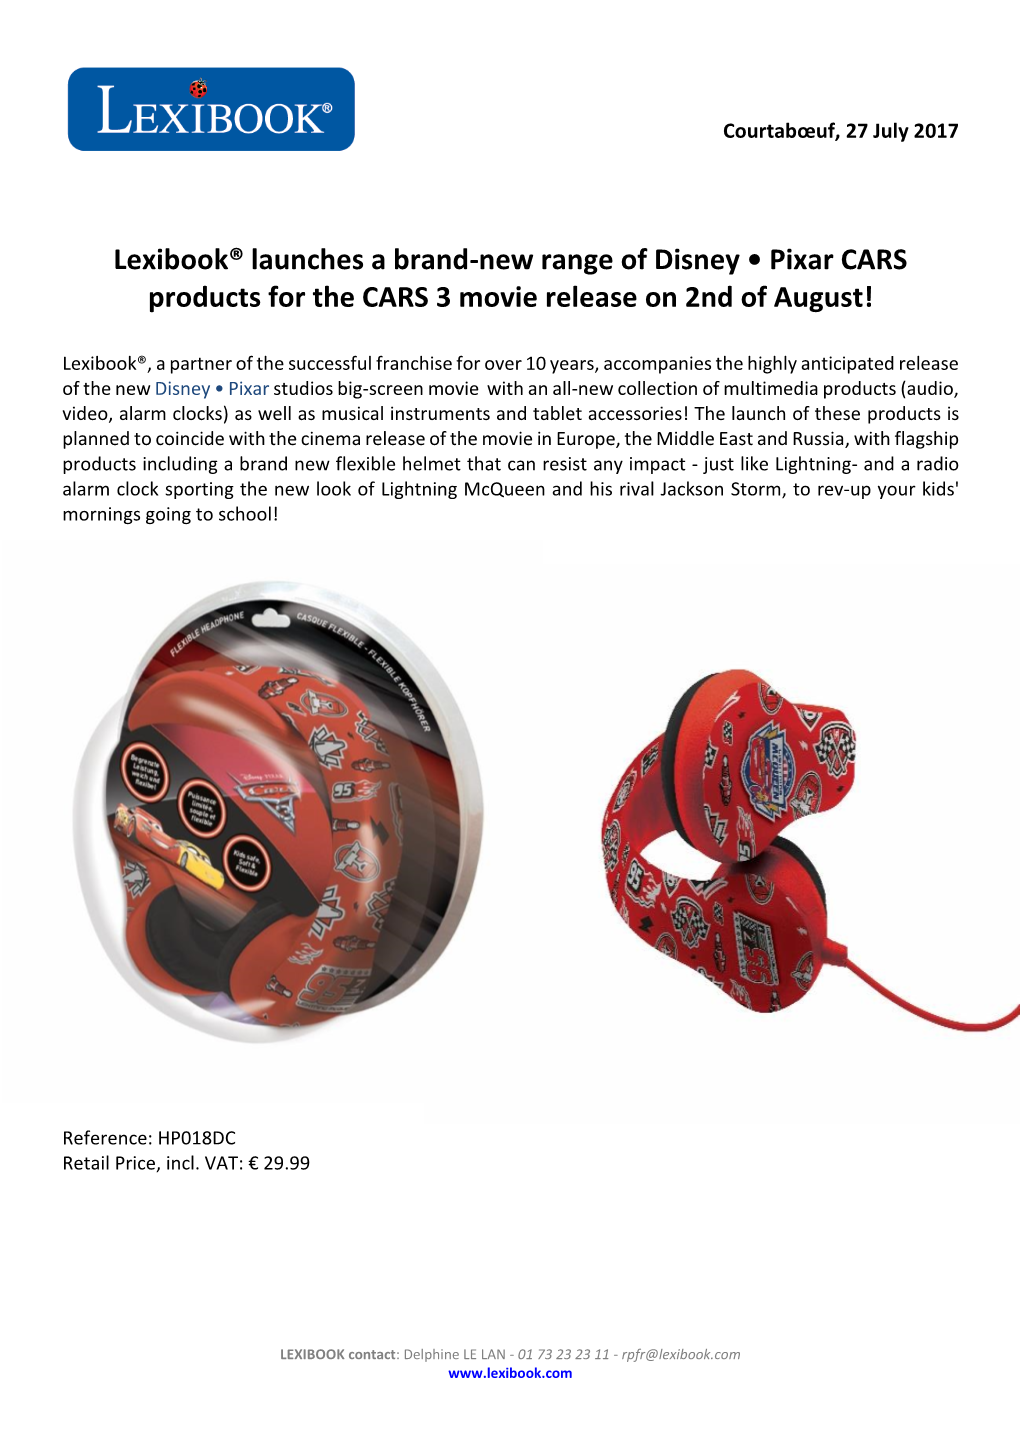 Lexibook® Launches a Brand-New Range of Disney • Pixar CARS Products for the CARS 3 Movie Release on 2Nd of August!